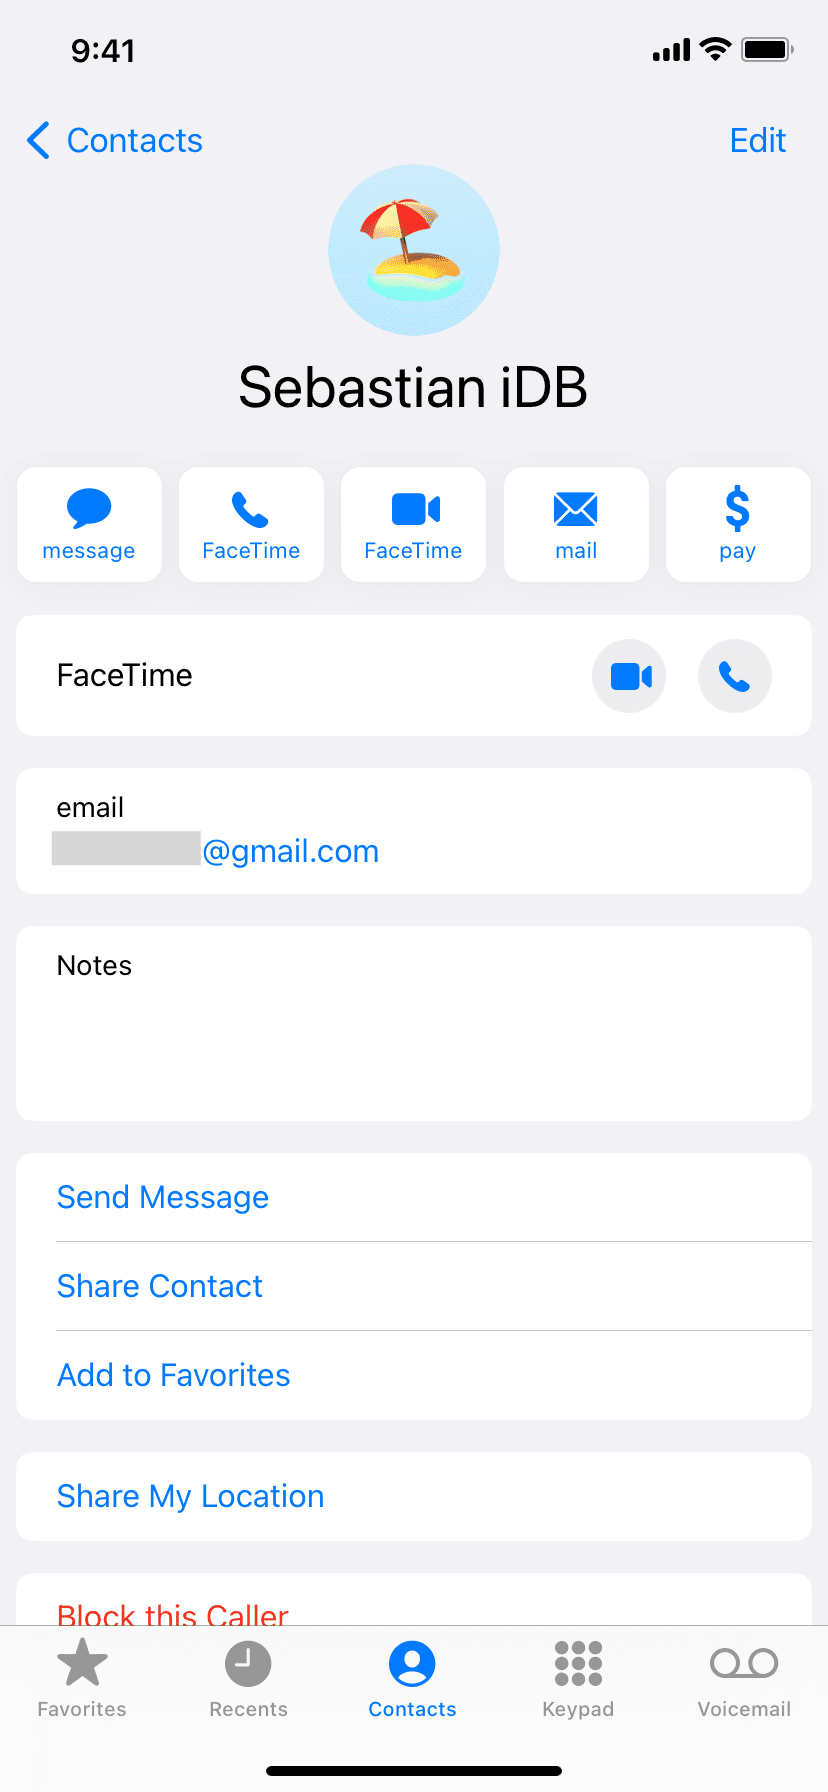 iMessage email for a contact